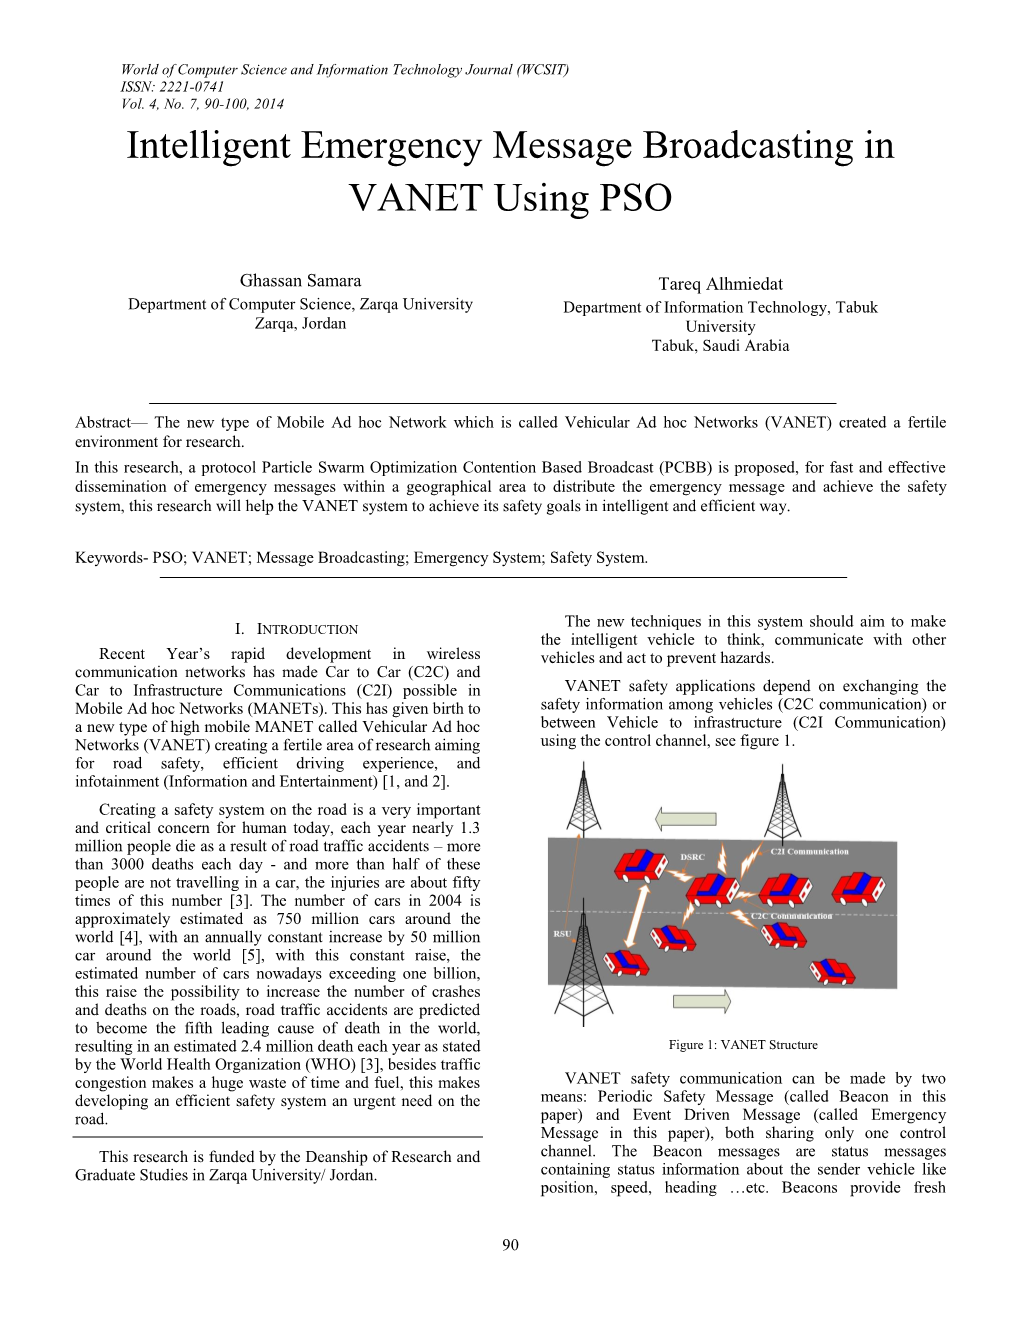 Intelligent Emergency Message Broadcasting in VANET Using PSO